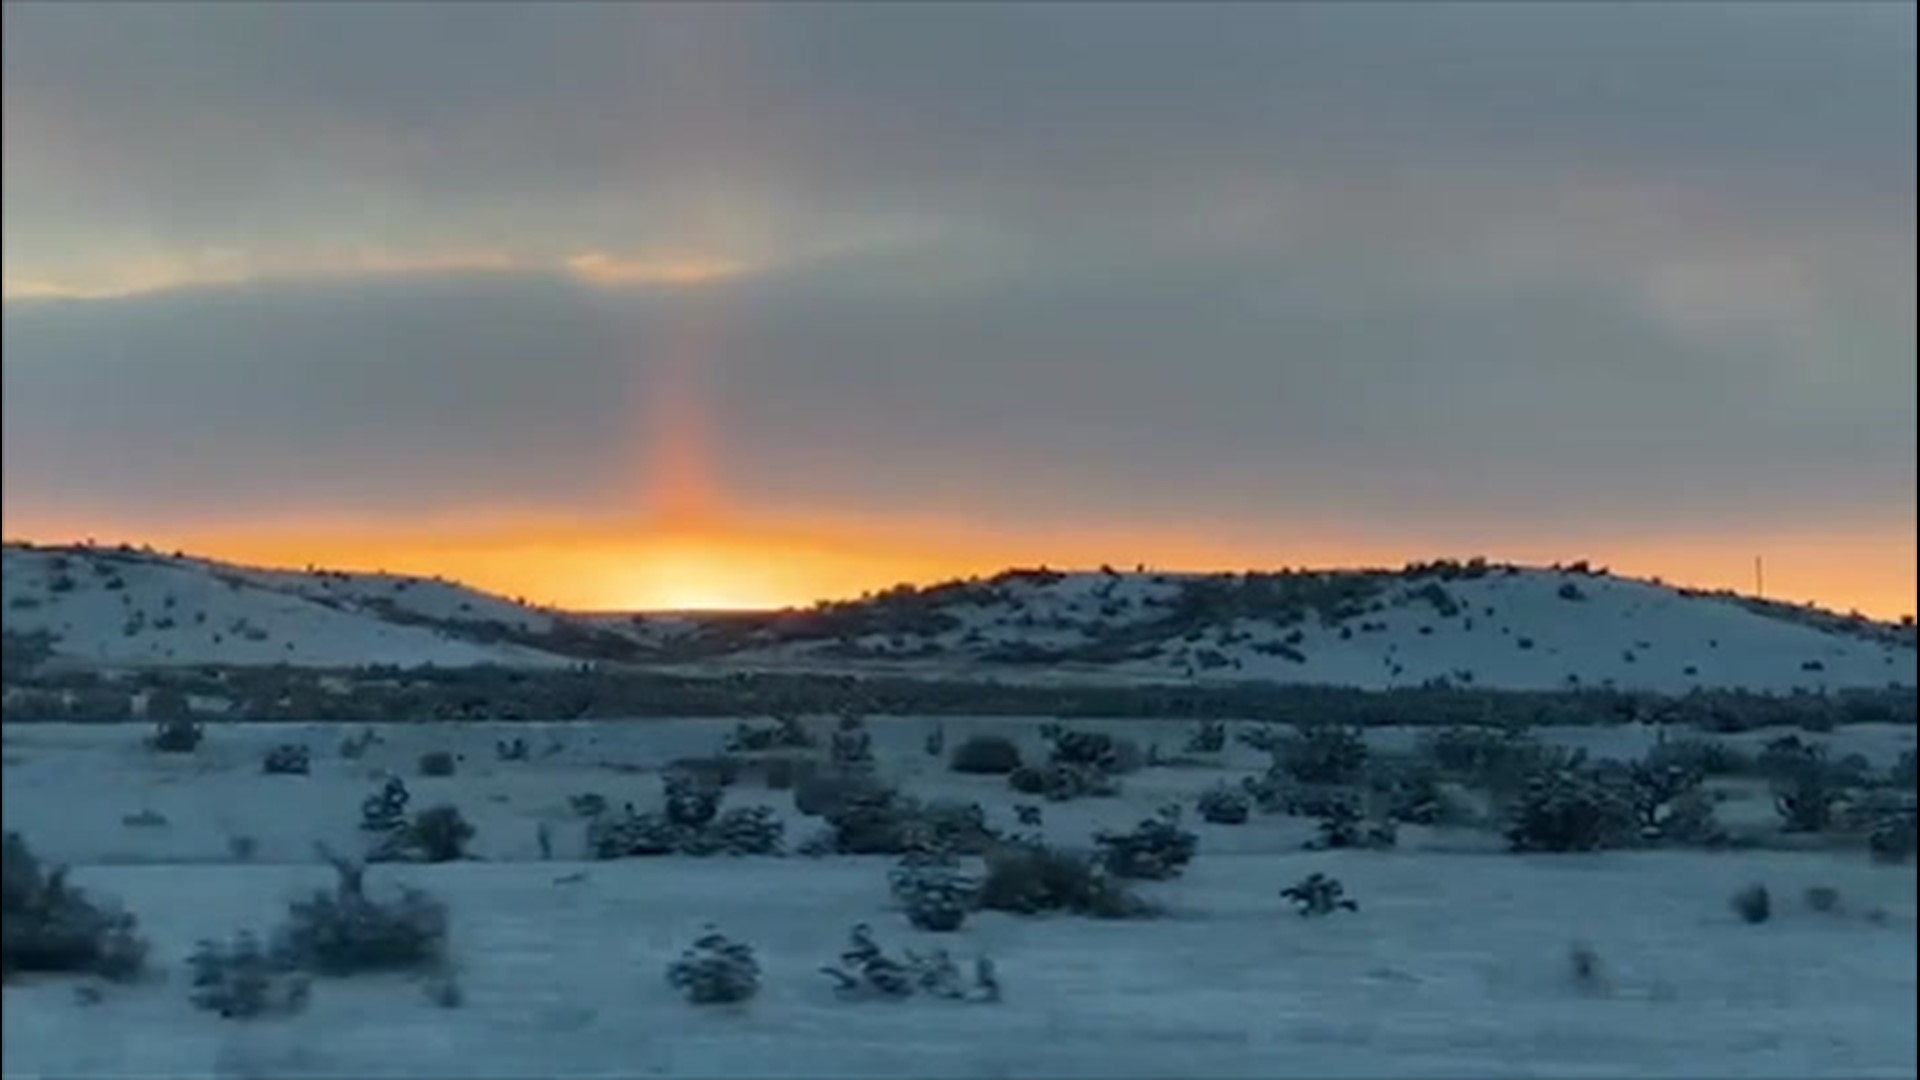 Driving through the snowy hills of Pueblo, Colorado, Reed Timmer captured footage of the sunset on the evening of Oct. 26.